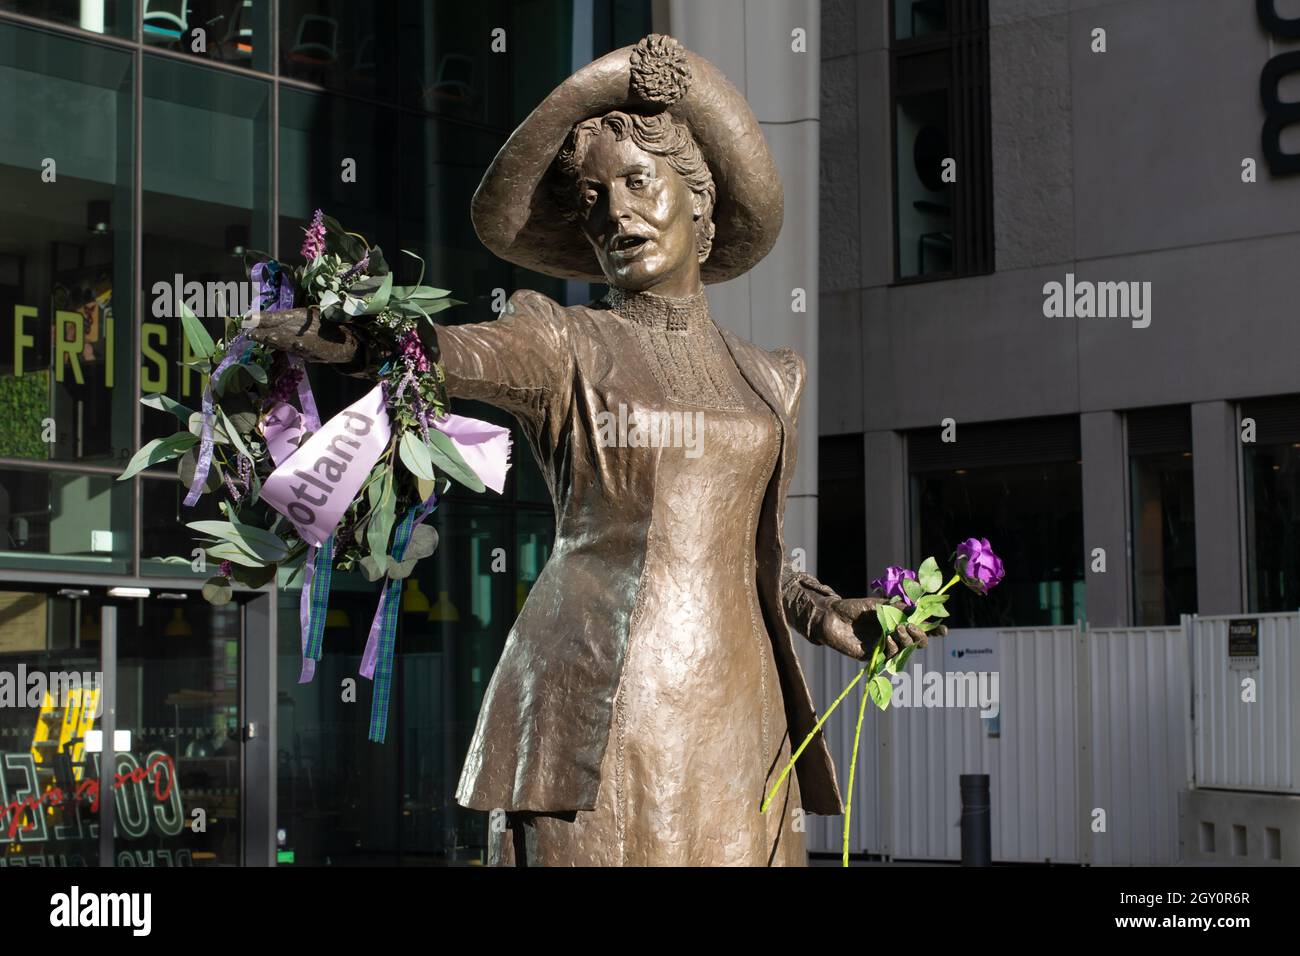 Emmeline Pankhurst statue, Manchester UK, with Scottish wreath on one hand. Tartan and purple colour theme. St Peter's Square Stock Photo